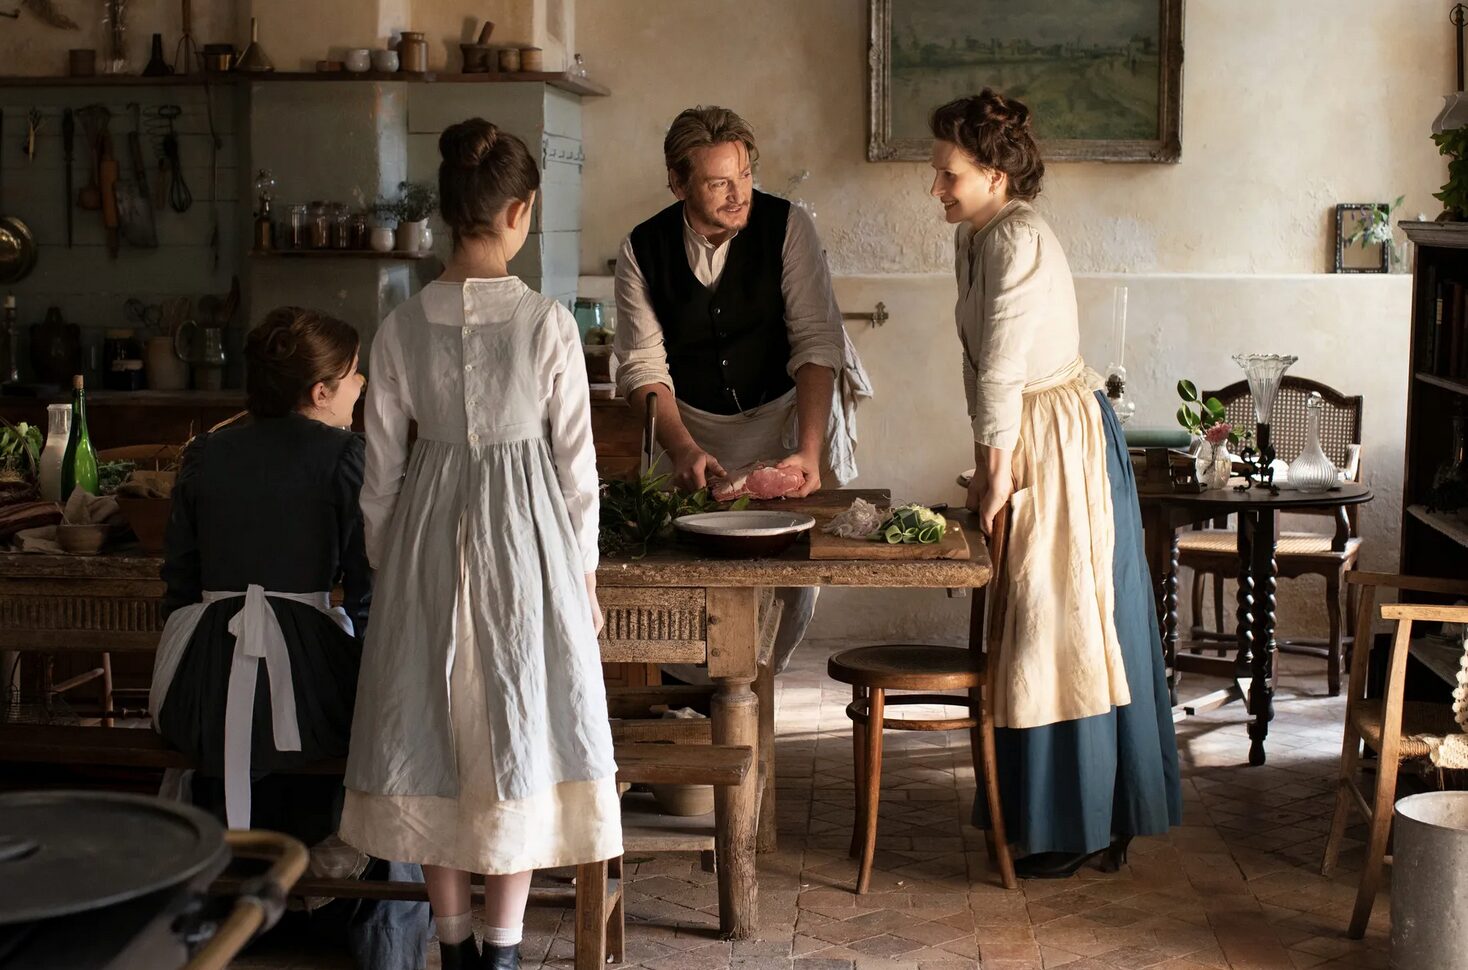 A man and three women in the kitchen